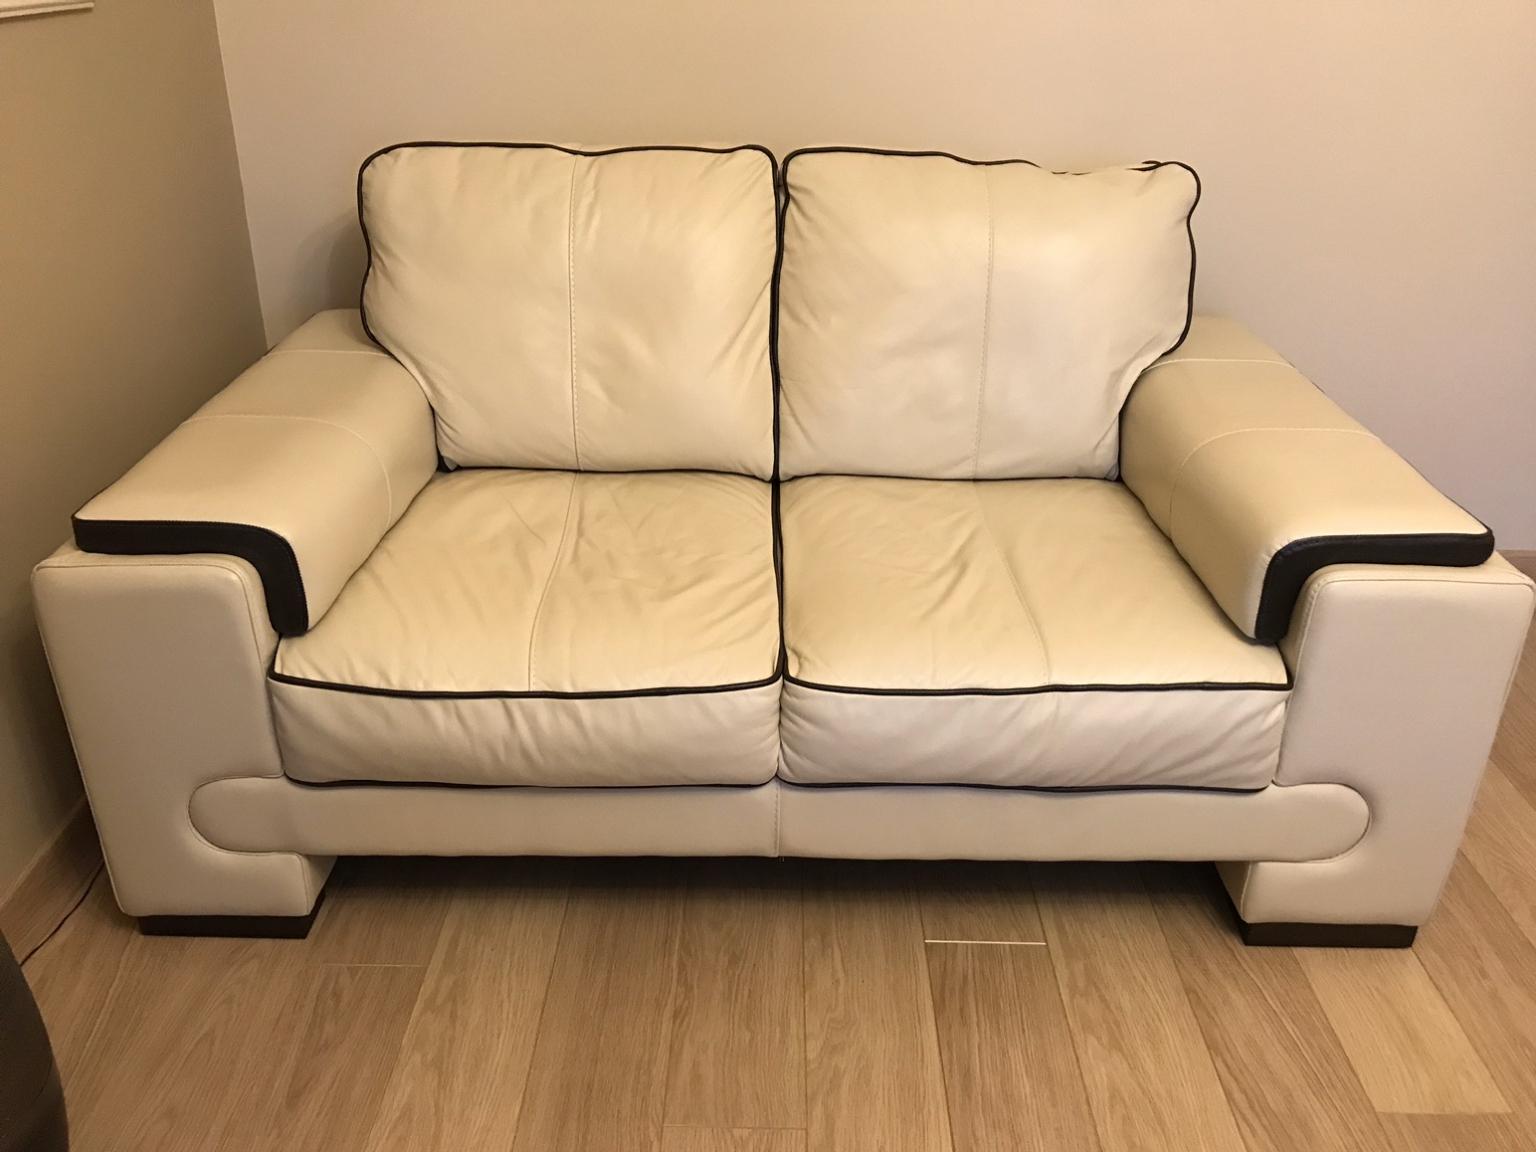 dfs leather sofa offers